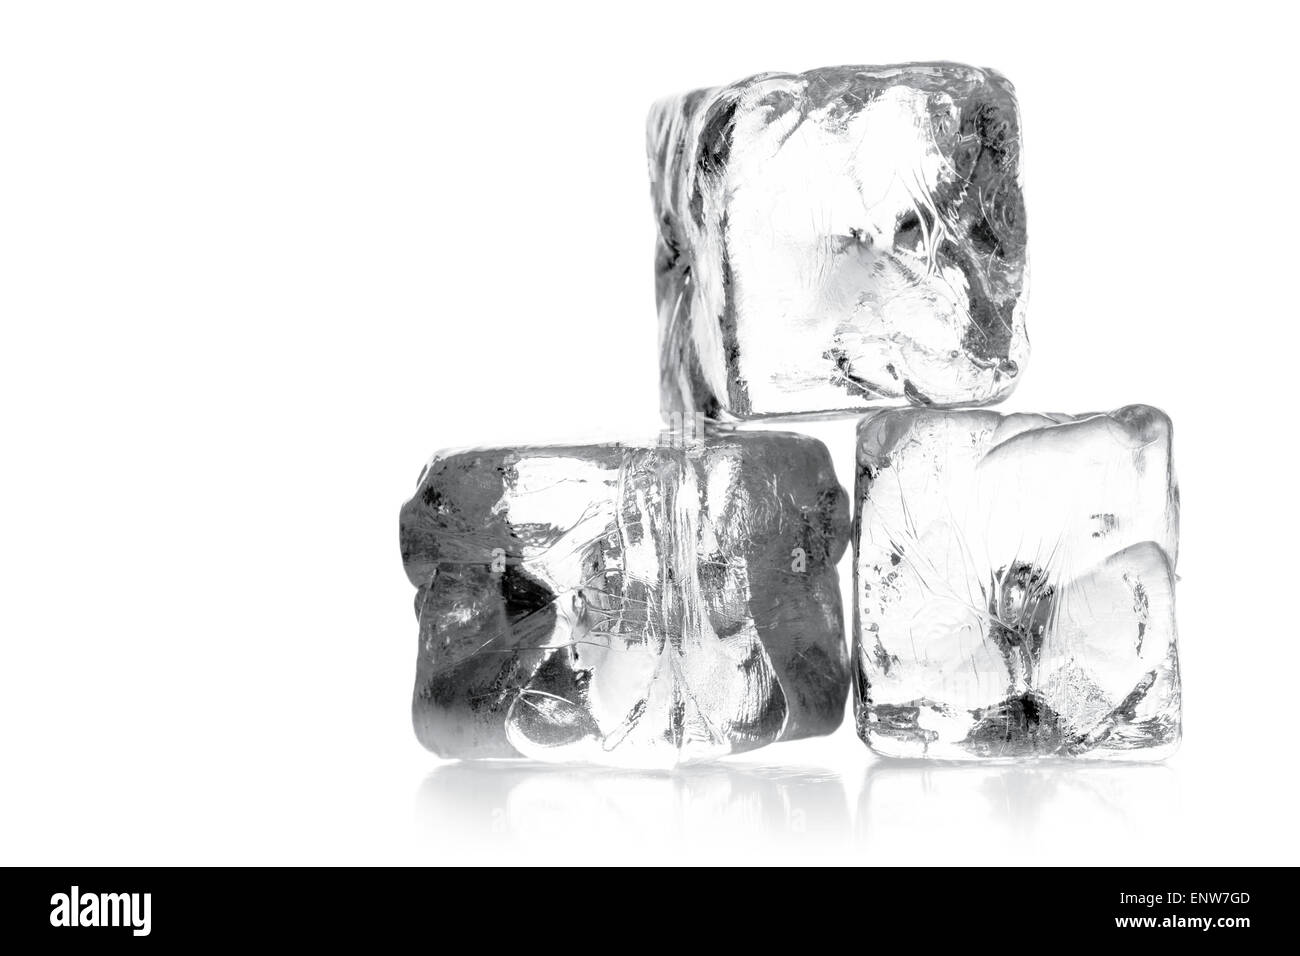 Heap of three ice cubes over white background Stock Photo